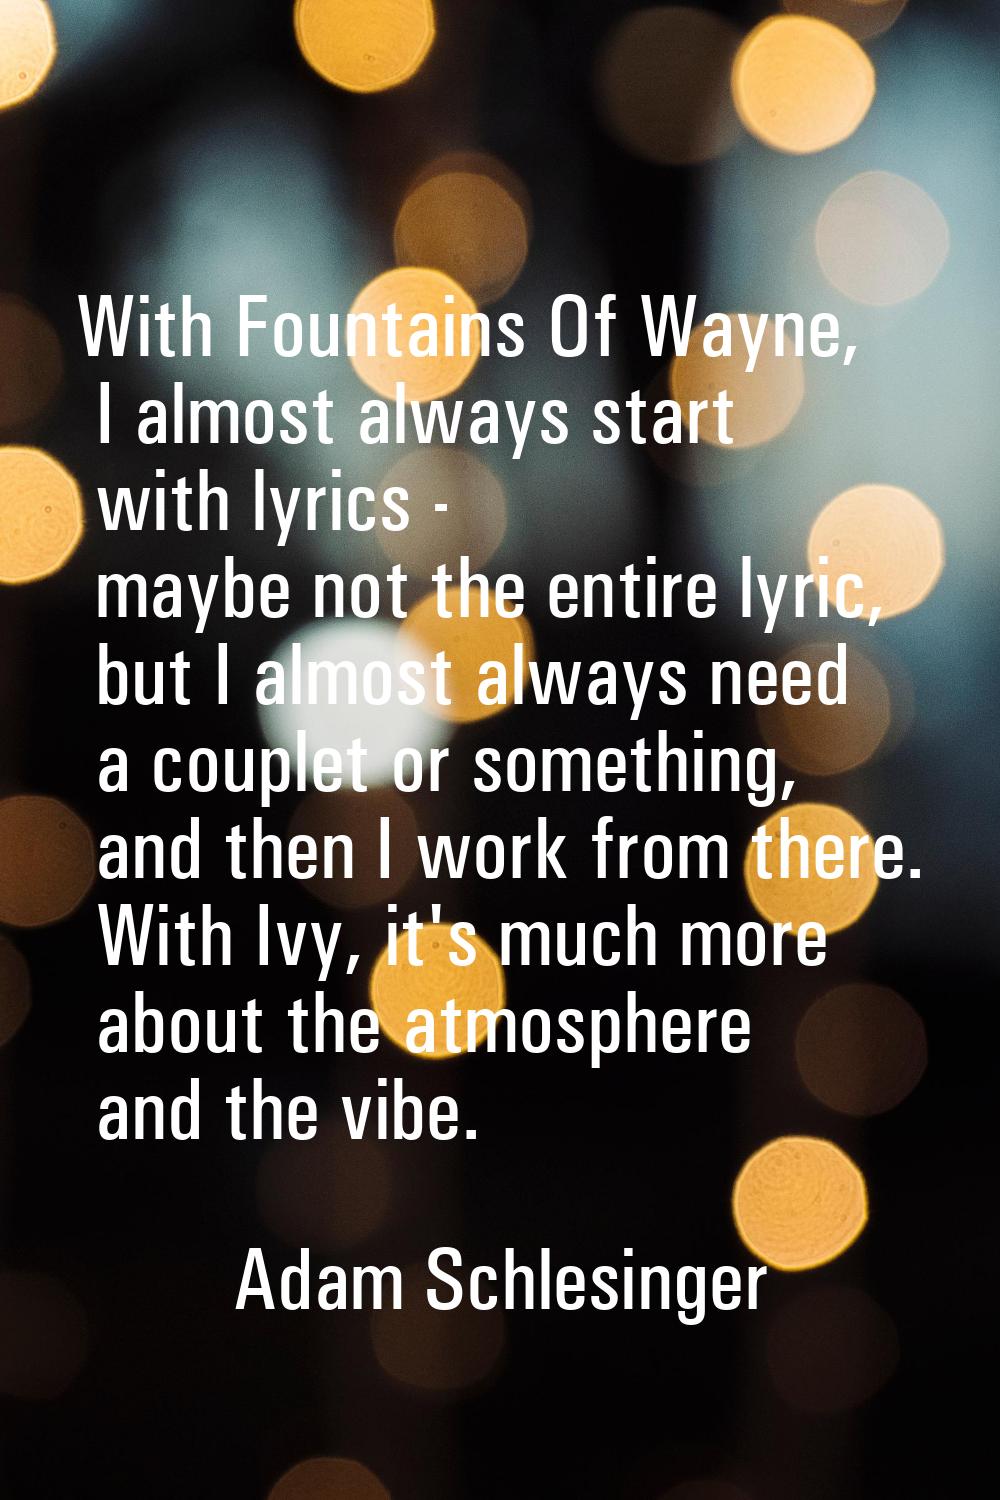 With Fountains Of Wayne, I almost always start with lyrics - maybe not the entire lyric, but I almo